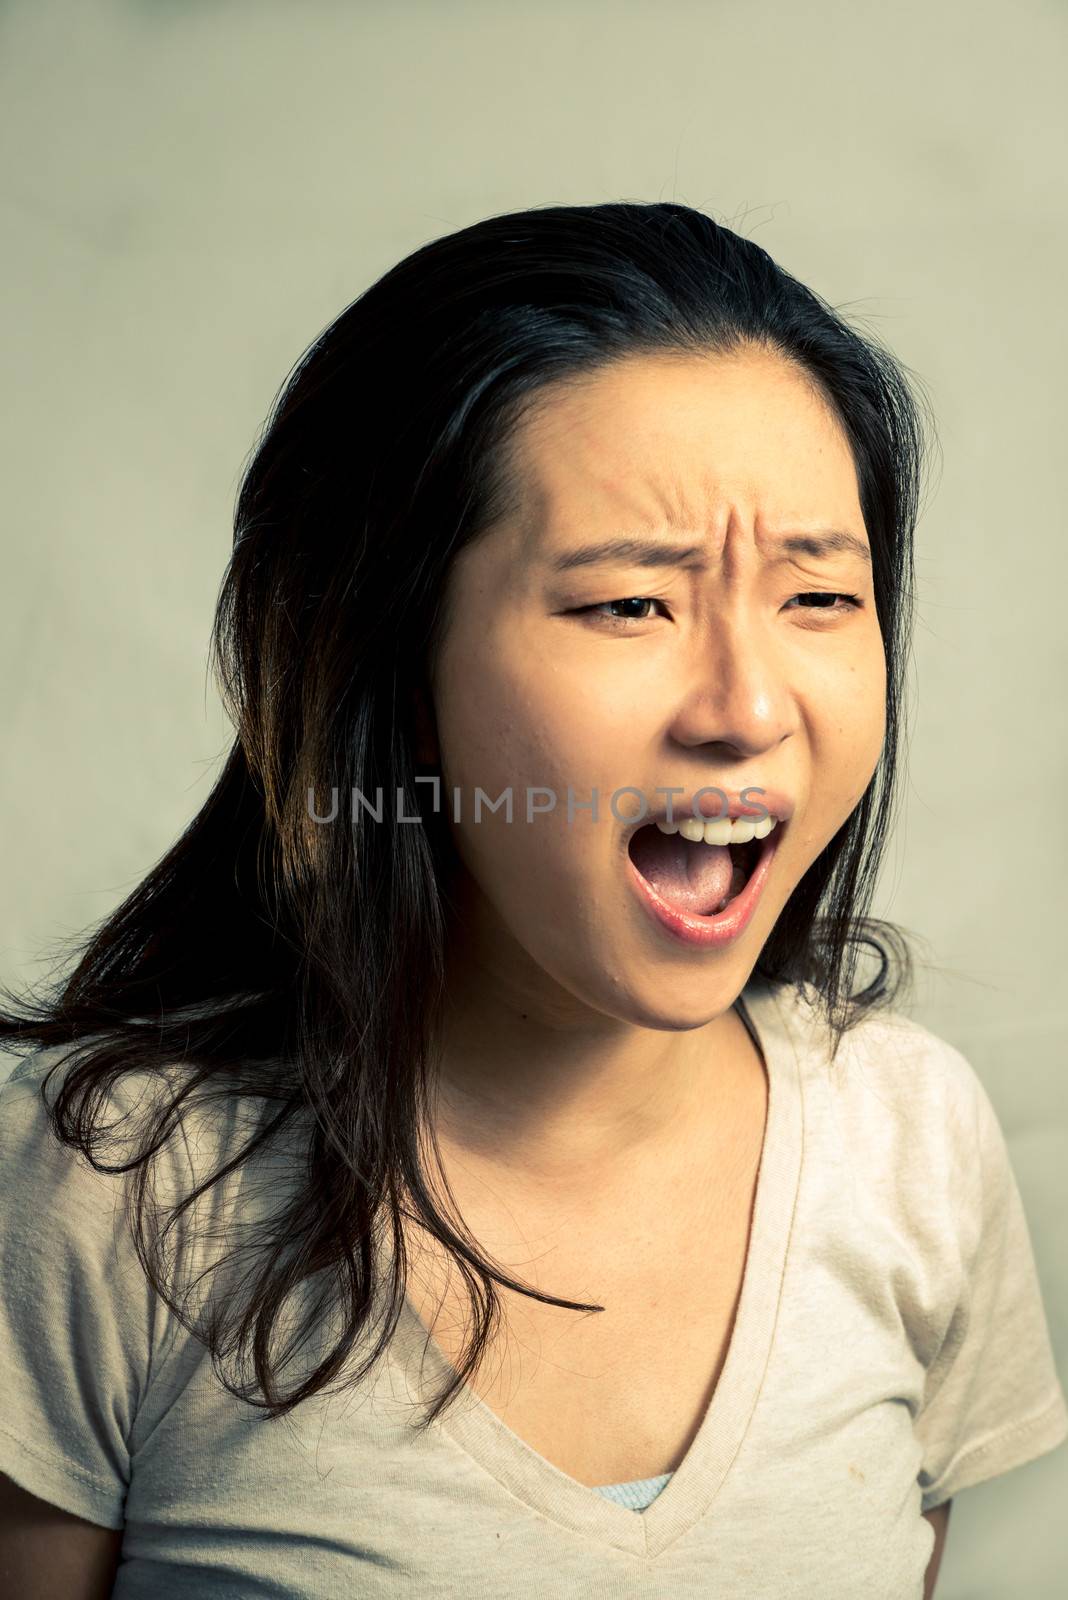 Young woman shouting, with fashion tone and background